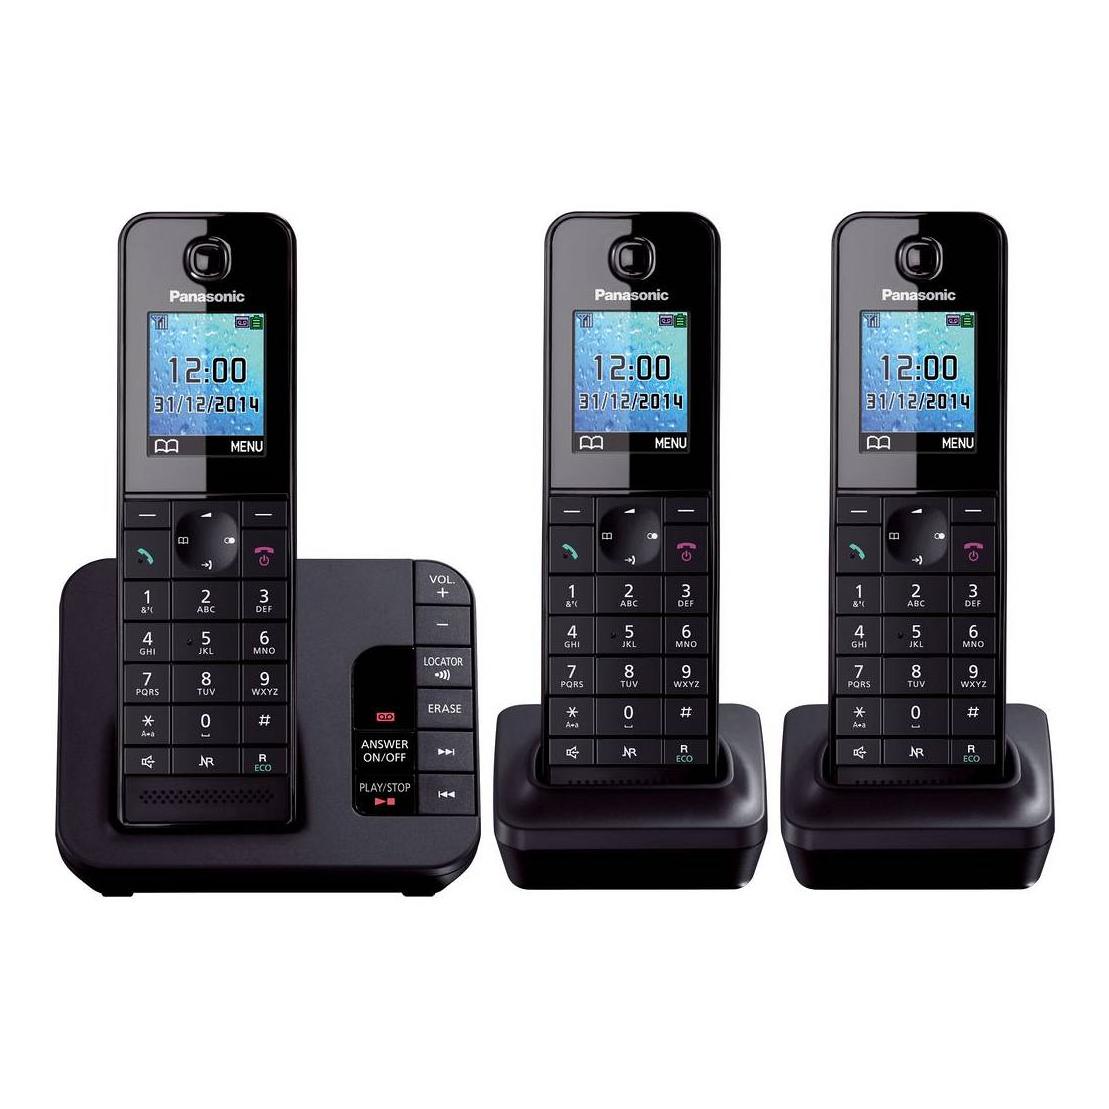 Panasonic Kx Tg81eb Cordless Phone With Answering Machine Twin Handsets Best Deals